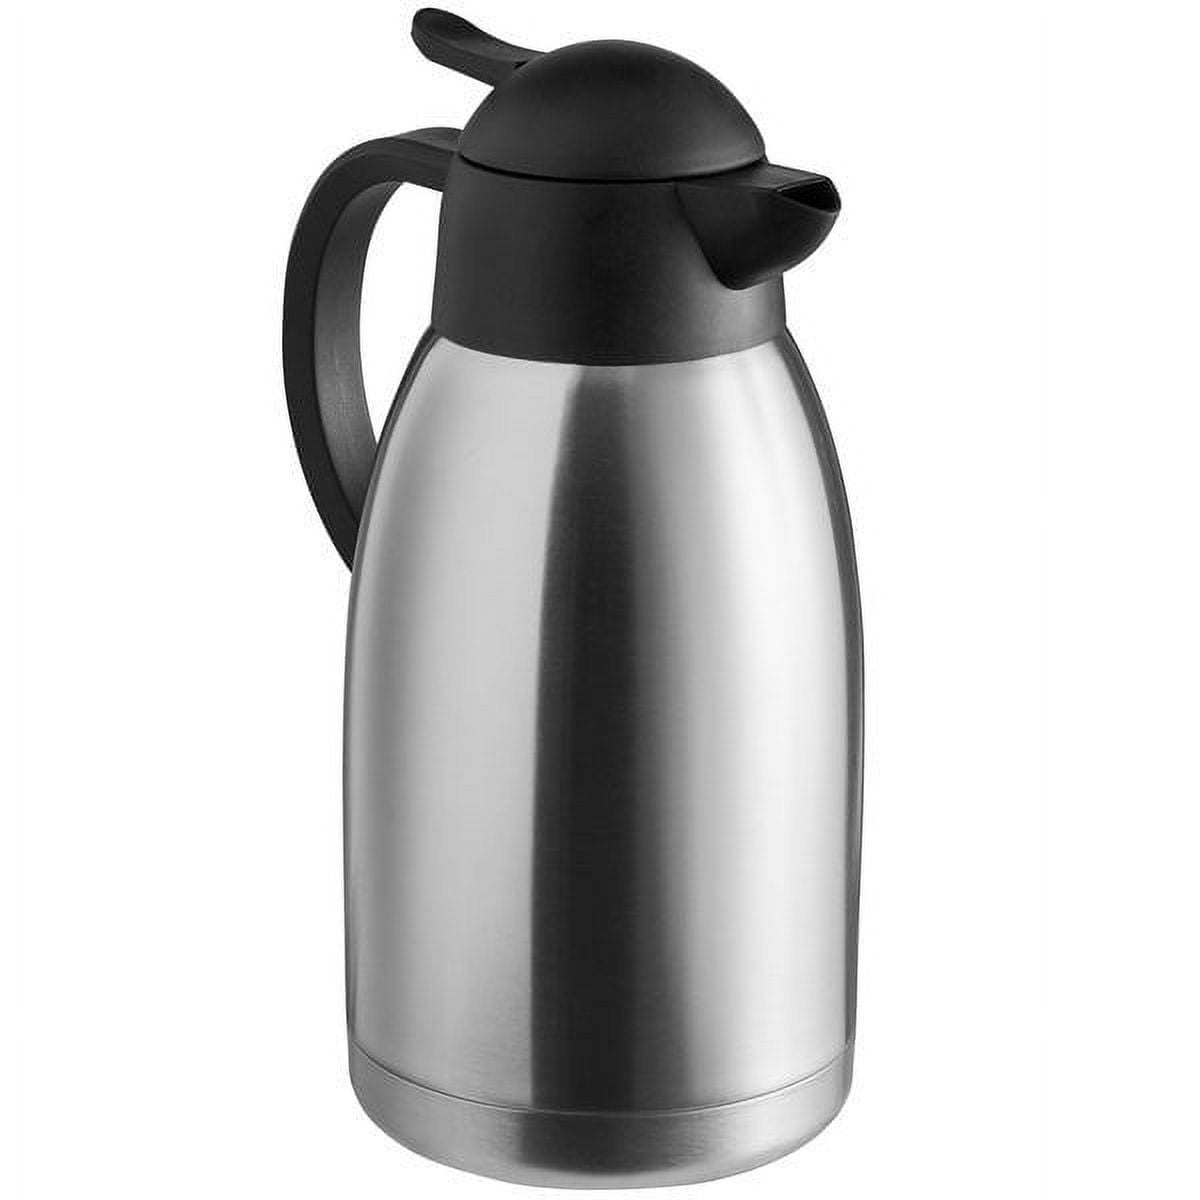 PARACITY Thermal Coffee Carafe/Tea Pot with Ceramic Liner 27 OZ, Small  Coffee Thermos Travel with Removable Stainless Steel Filter for Hot Drinks